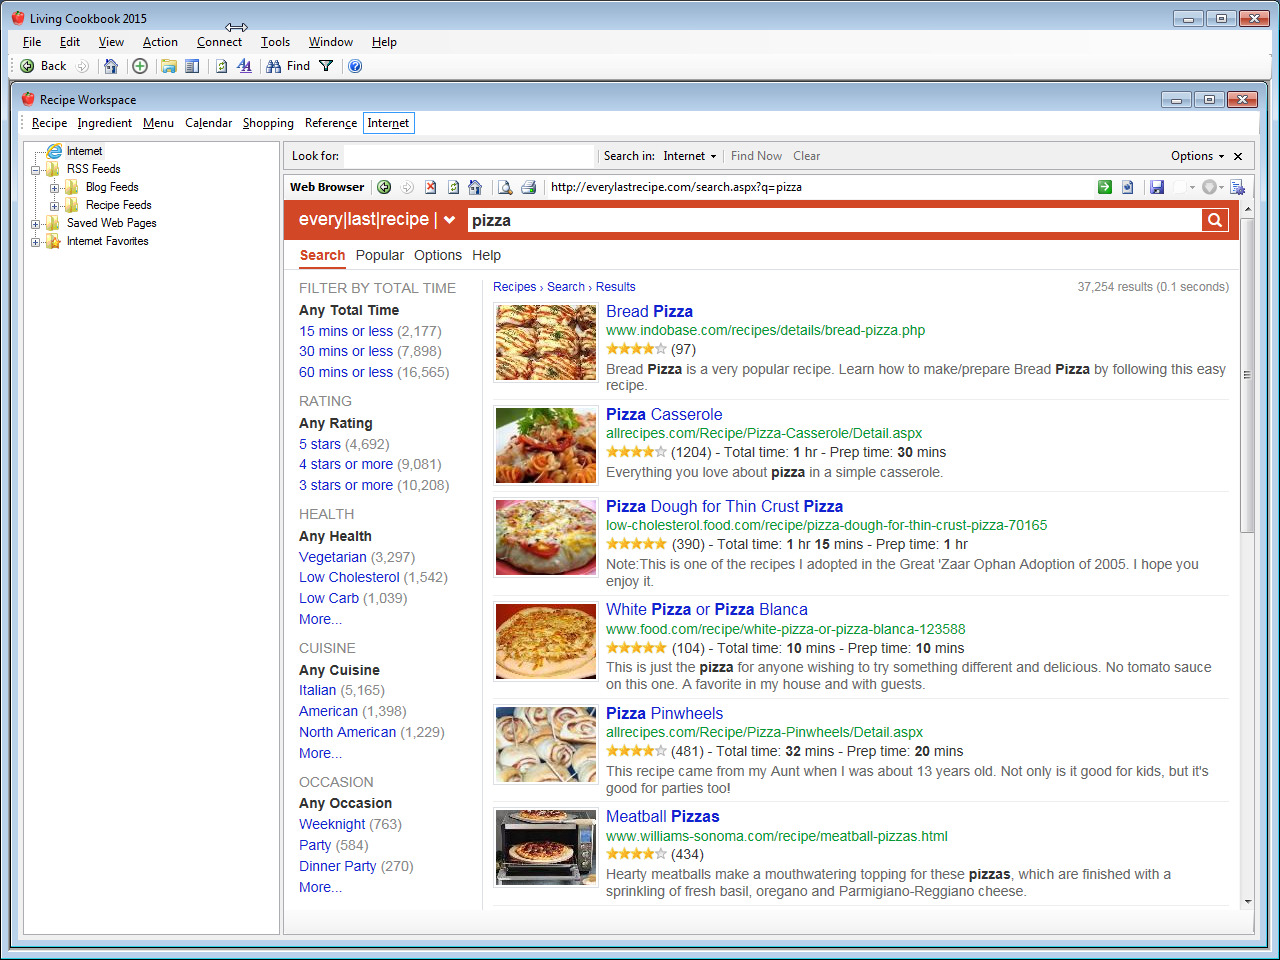 View a web page in Living Cookbook's web browser